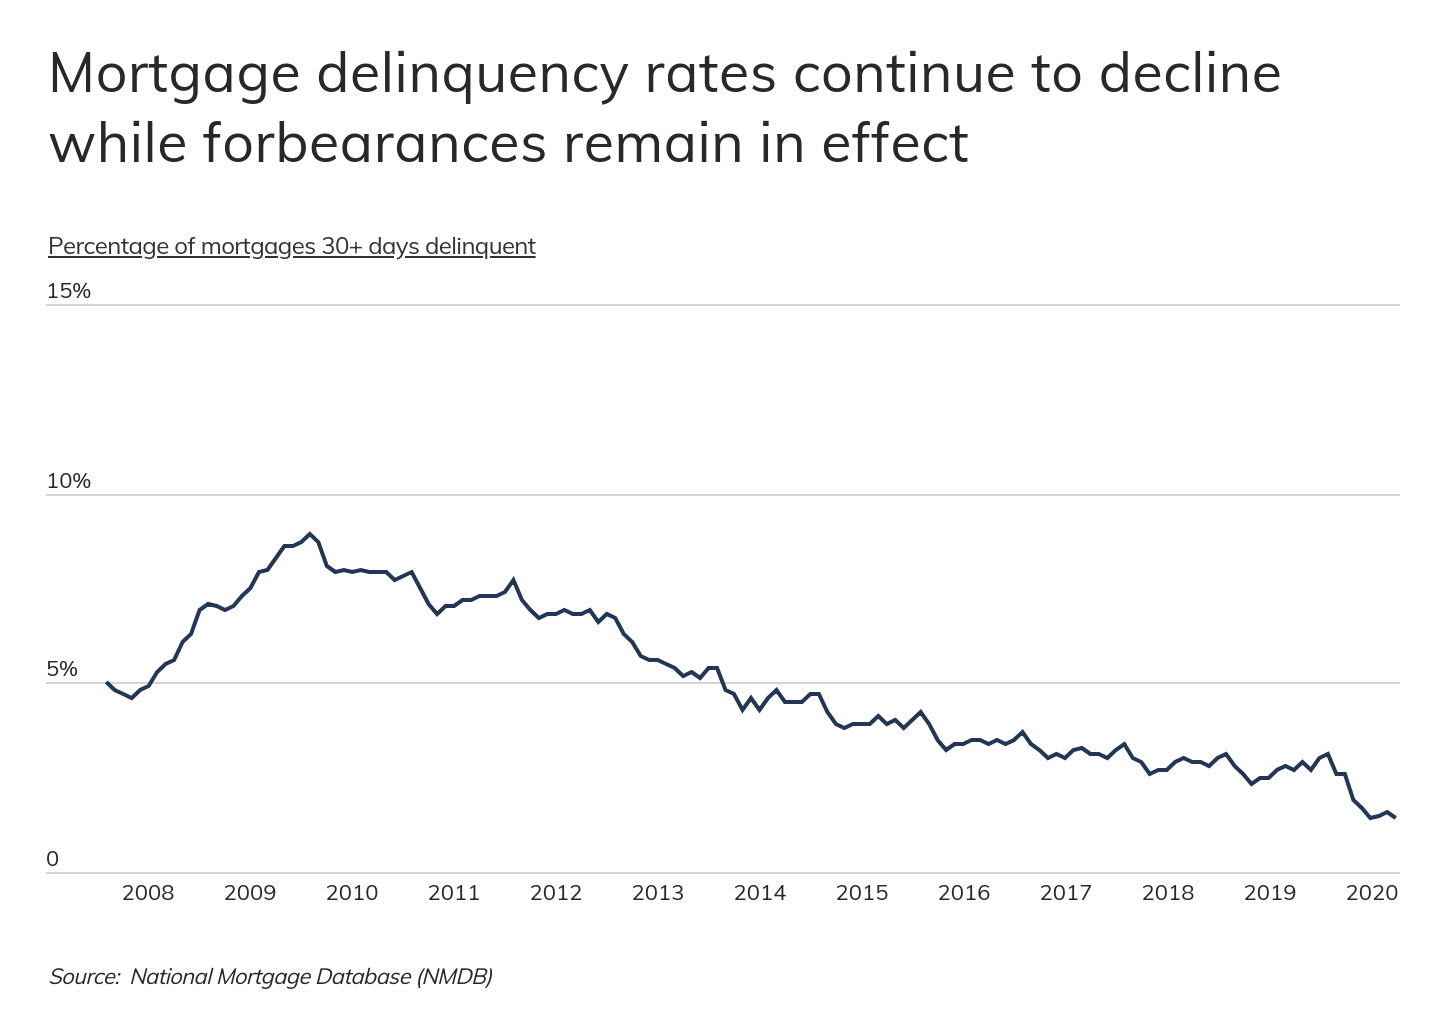 The cities with the highest rates of mortgage delinquency